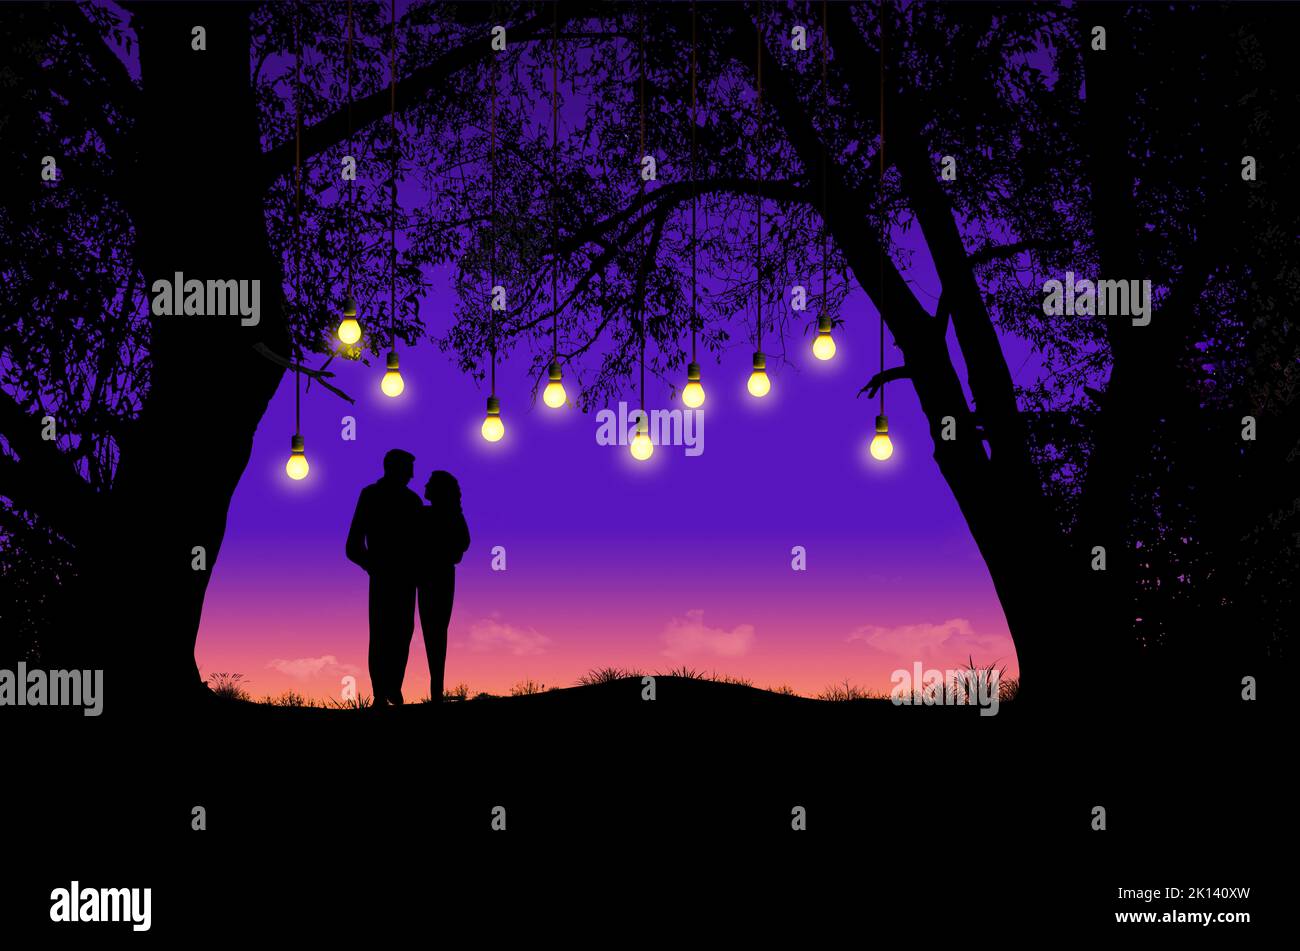 A man and woman are seen together at dusk in a wooded scene that is illuminated with hanging light bulbs in this 3-d illustration. Stock Photo